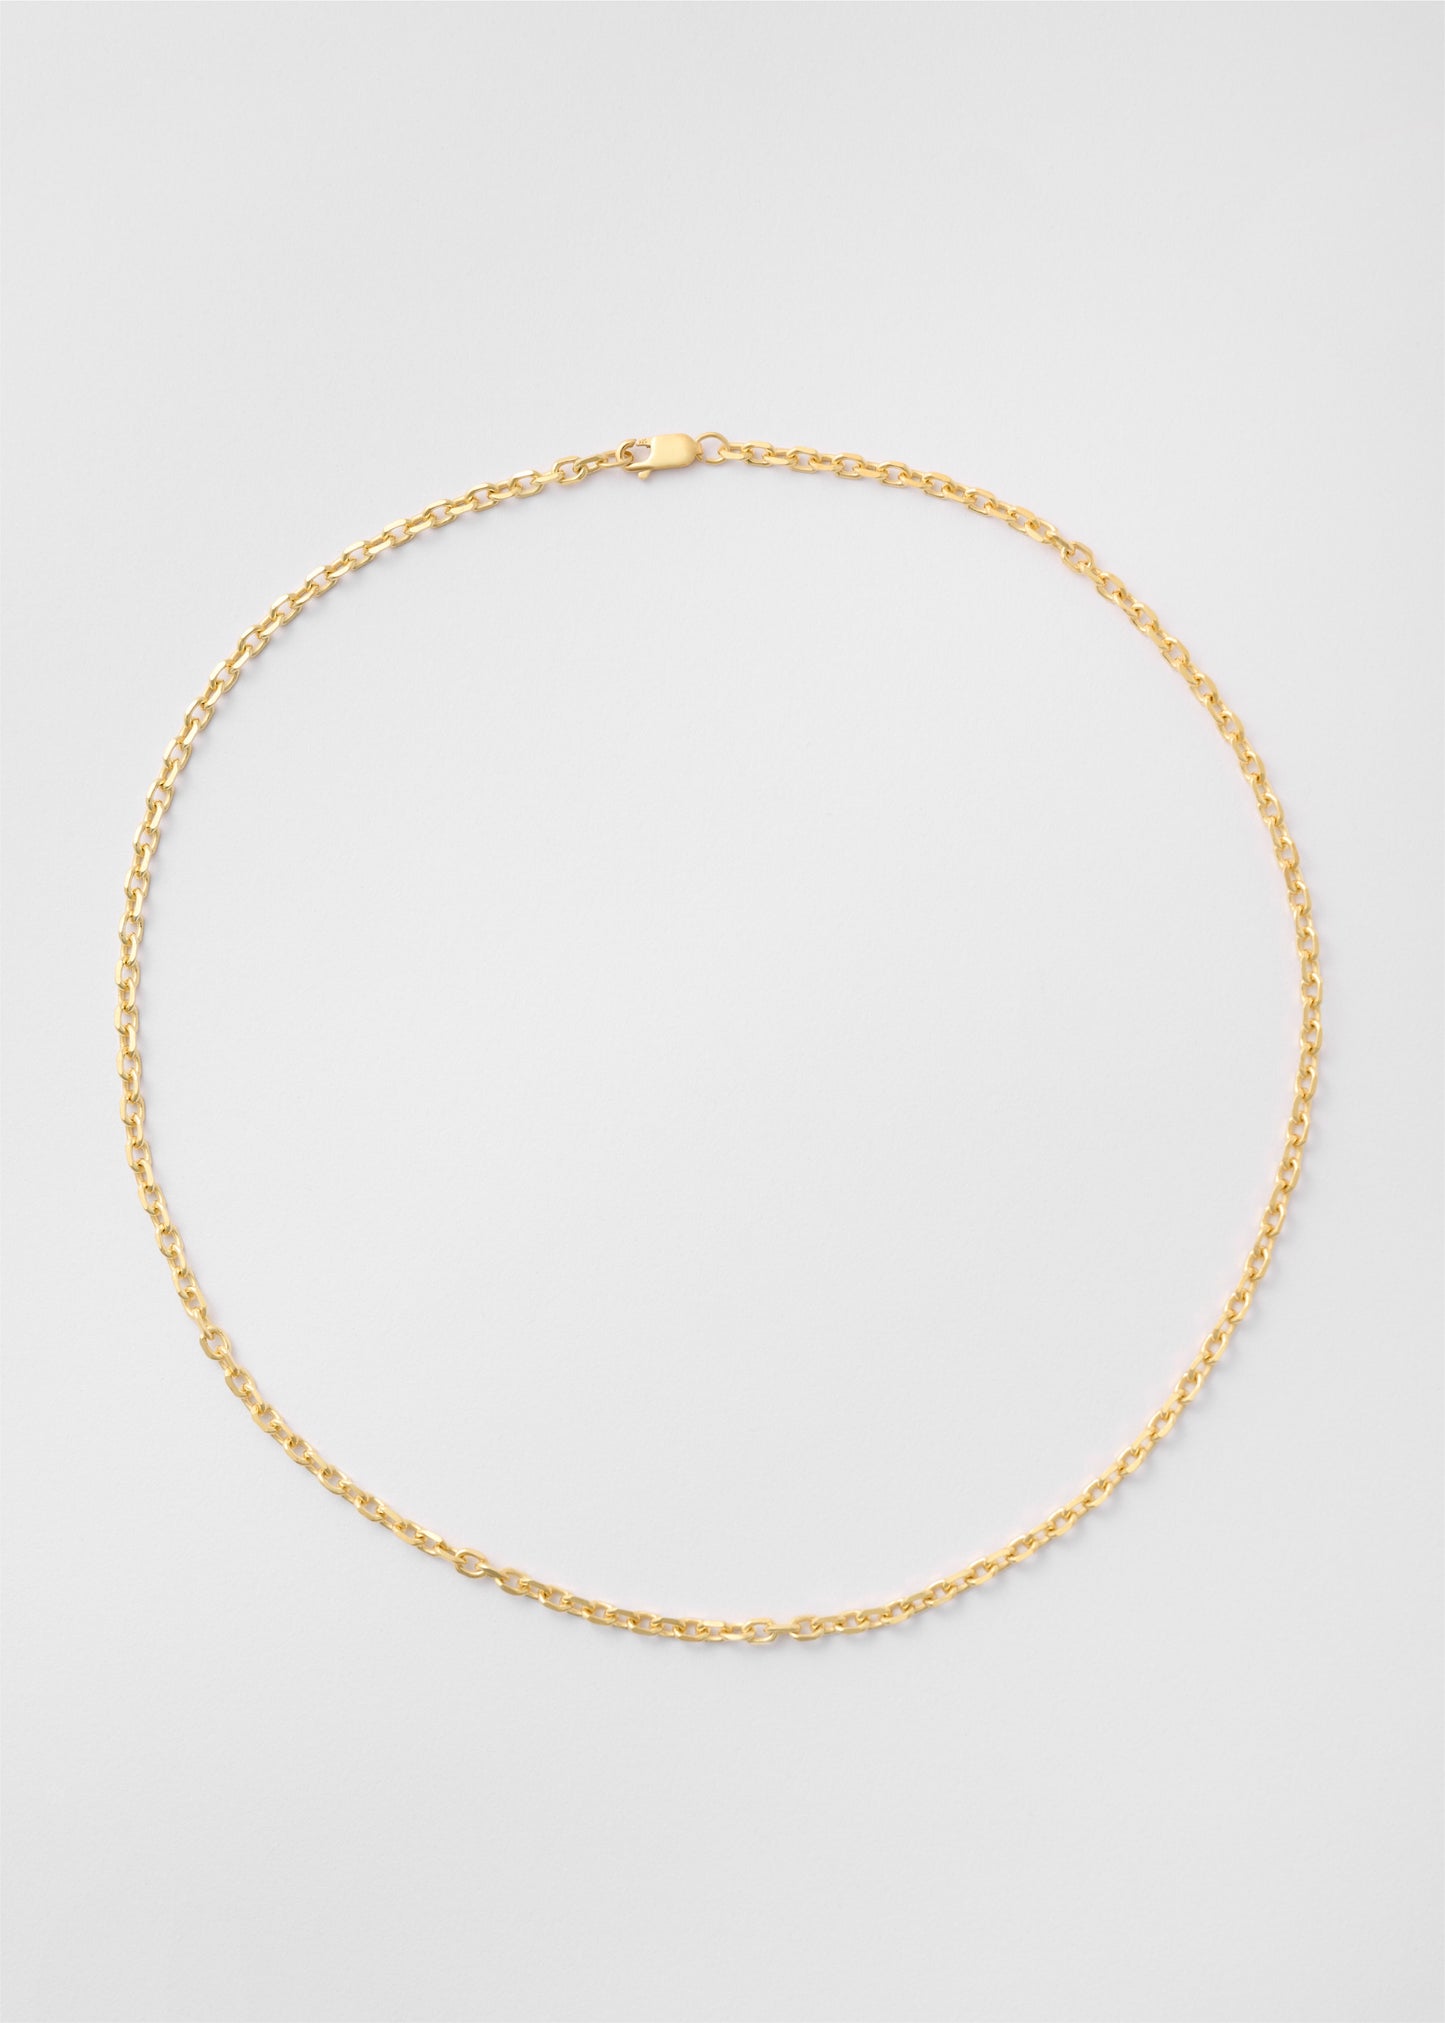 Thin gold Anchor necklace